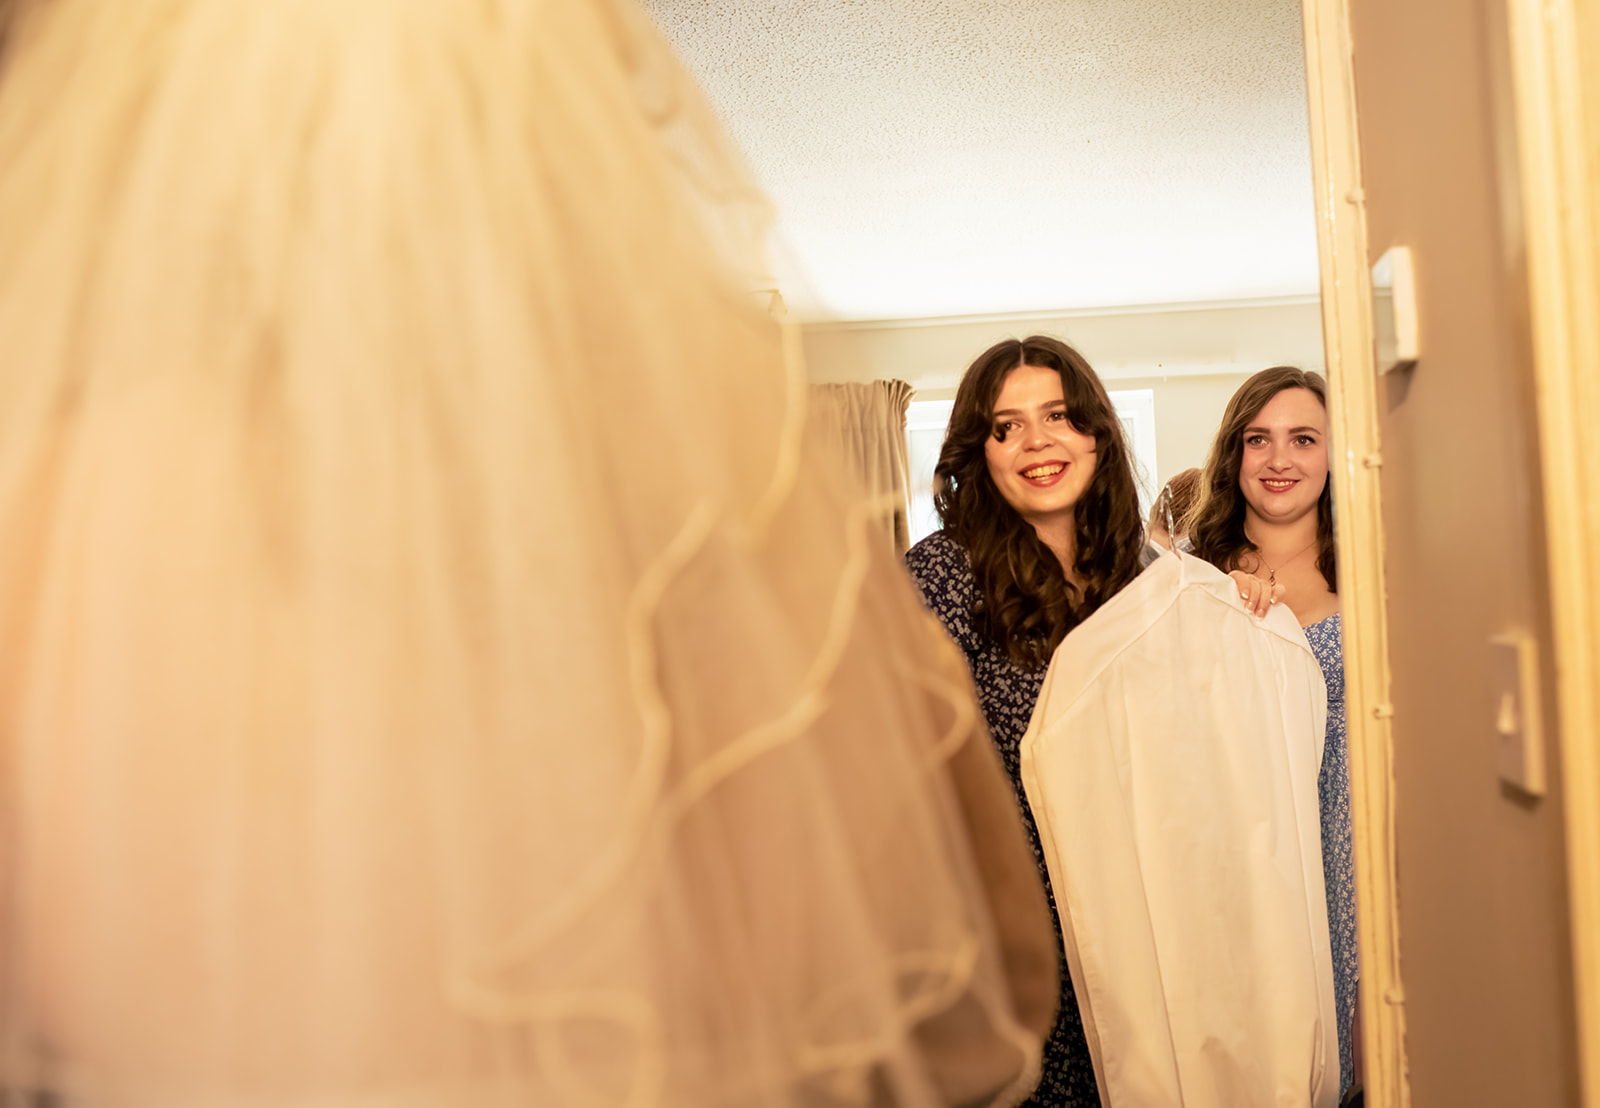 Bridesmaids-first-look-reaction-to-bride-in-wedding-dress